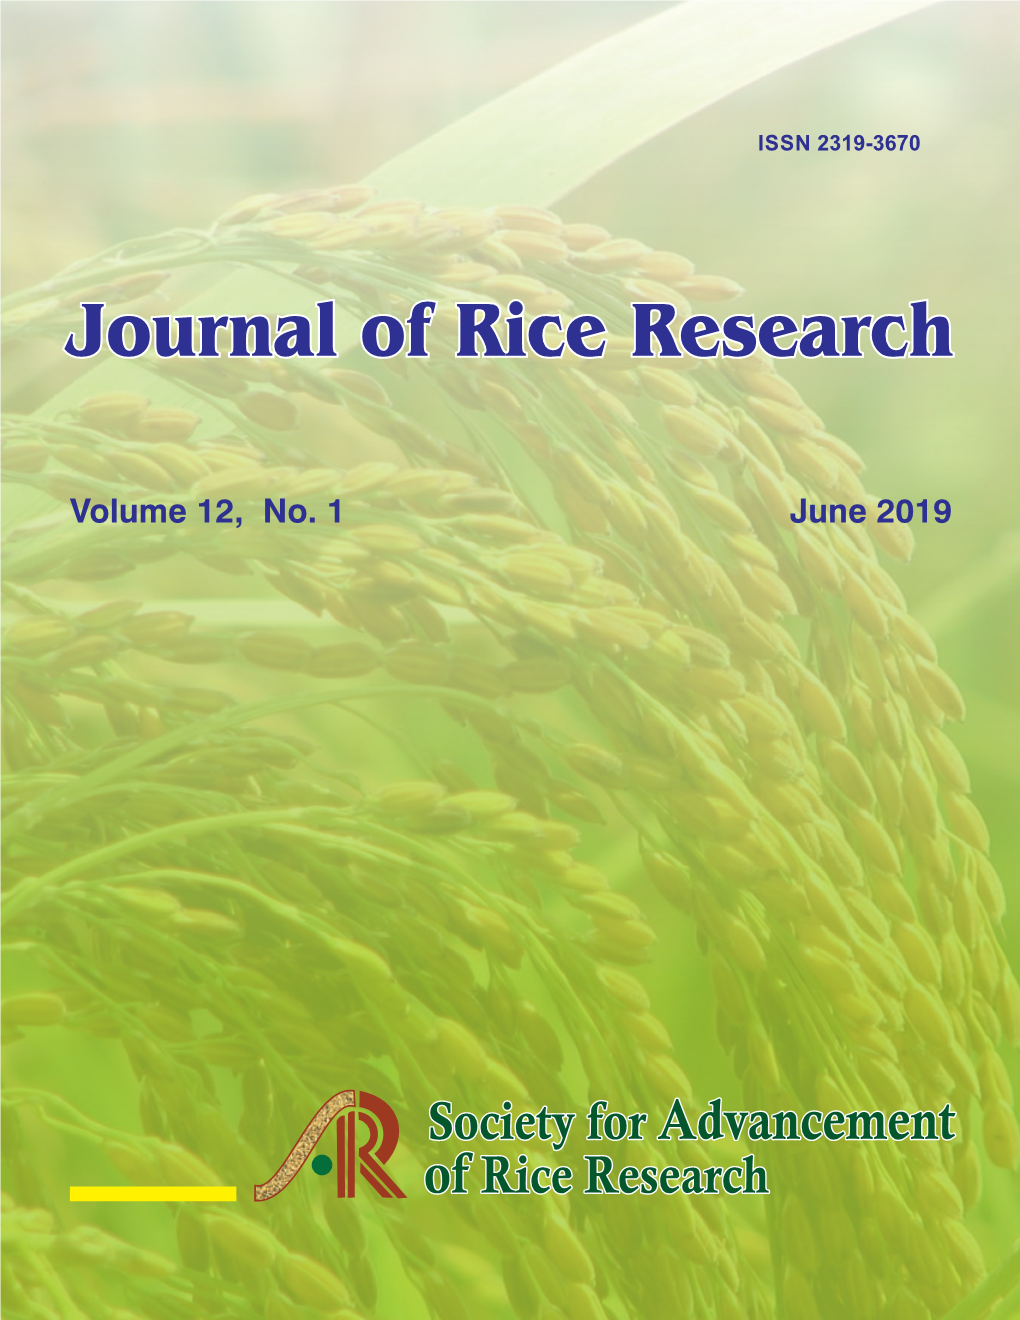 Journal of Rice Research